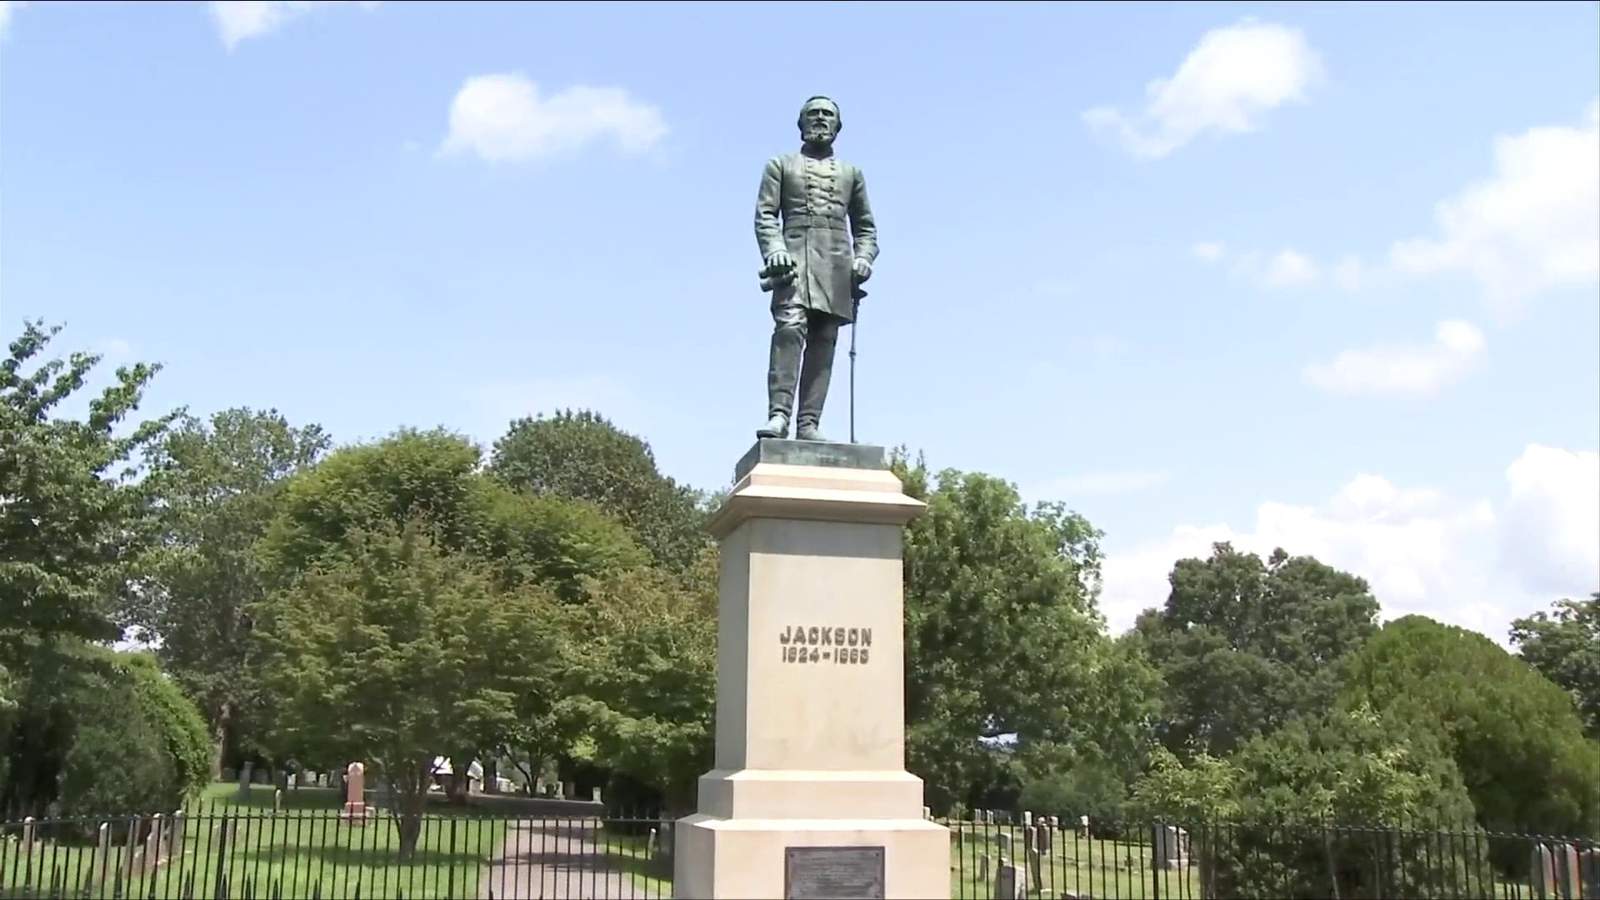 Petition filed to stop renaming of Stonewall Jackson Memorial Cemetery in Lexington